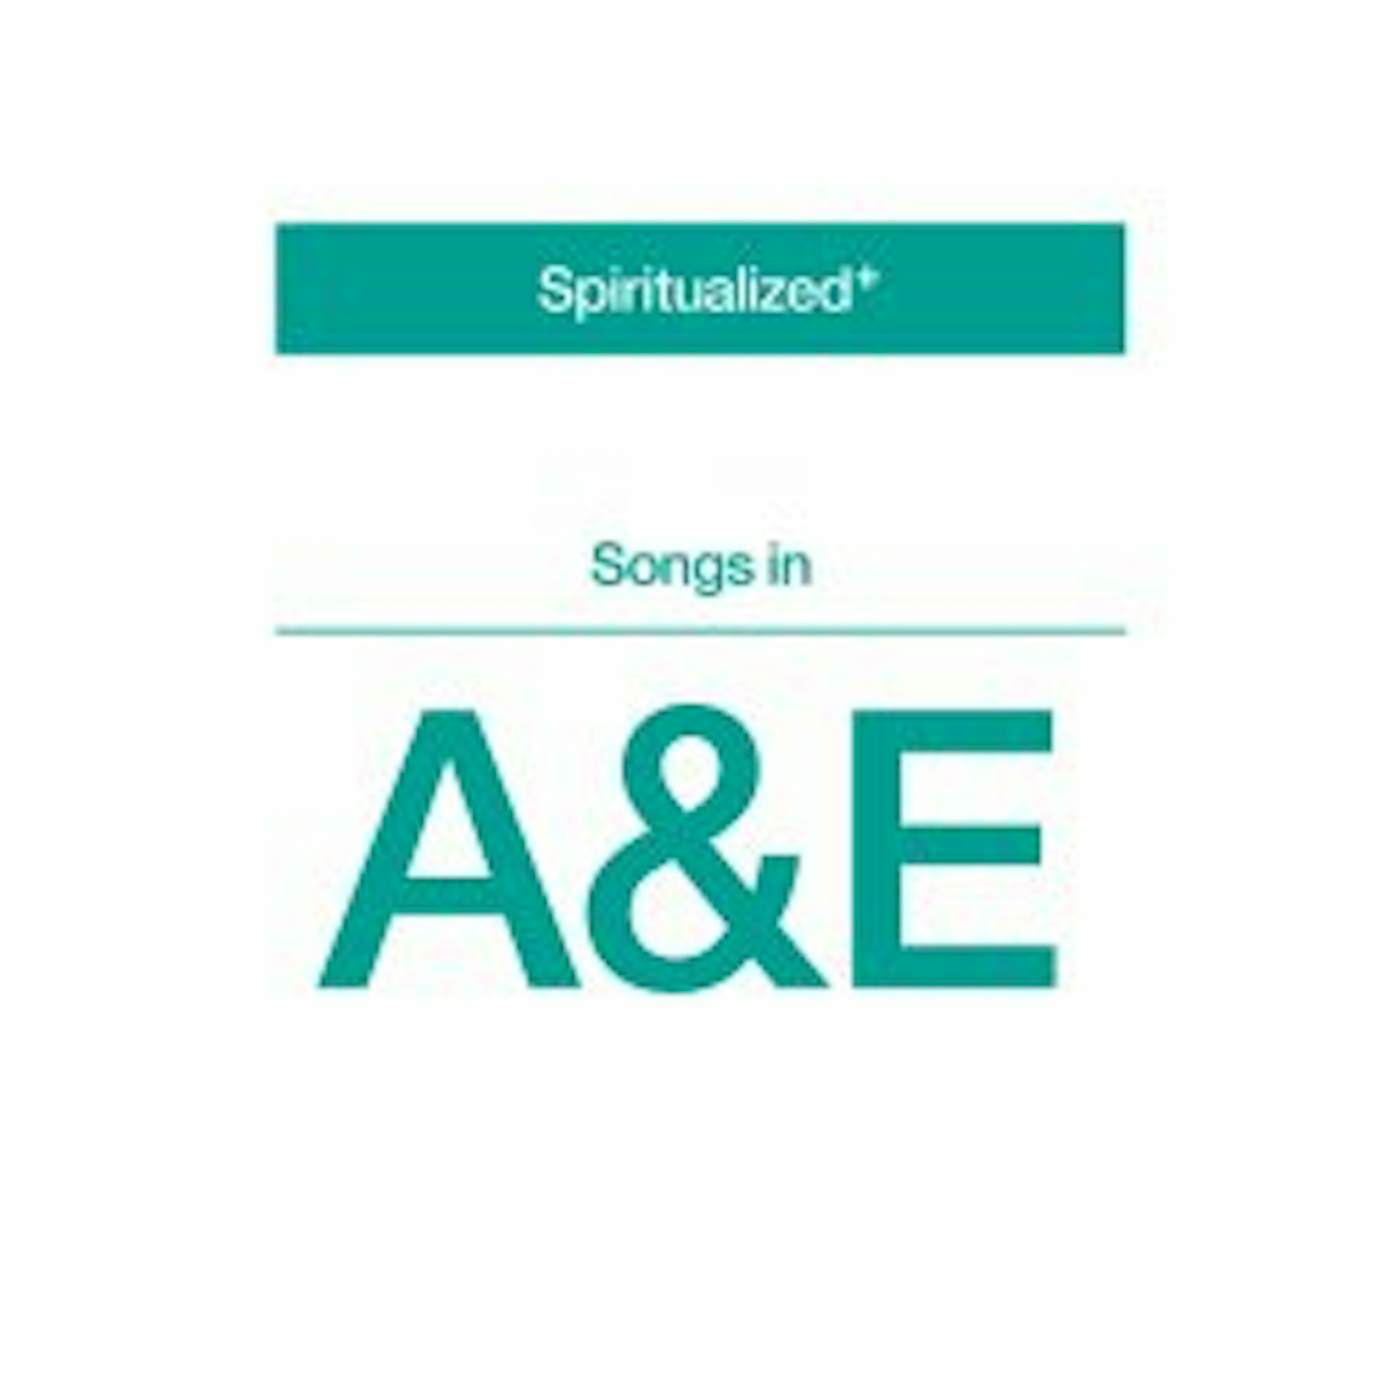 Spiritualized SONGS IN A&E CD